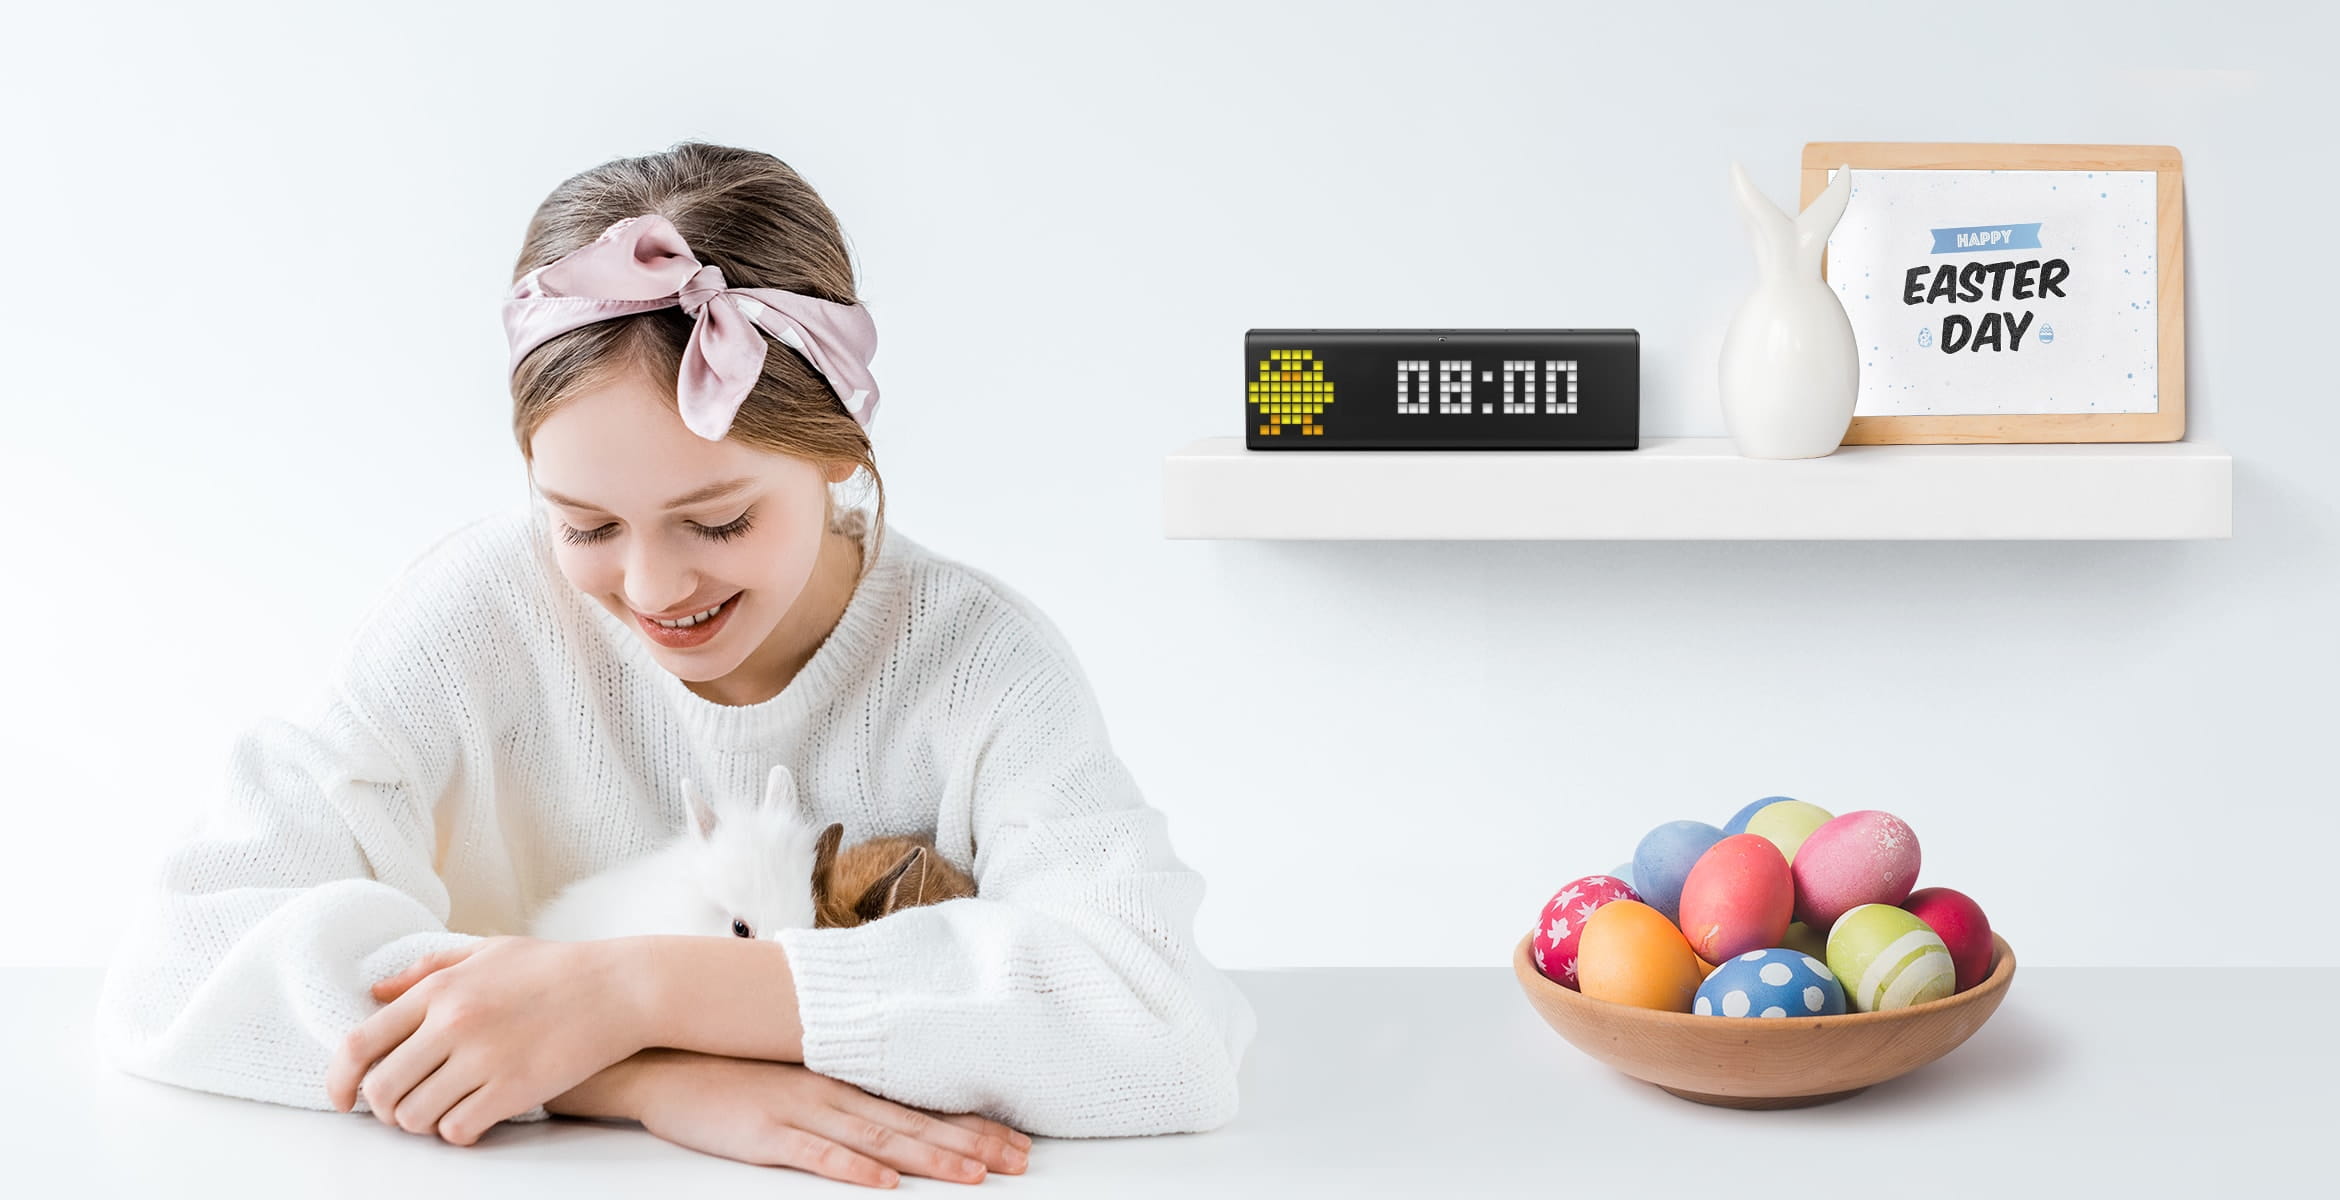 LaMetric Time smart clock shows time and a festive clock face, standing in a room with Easter Day decorations